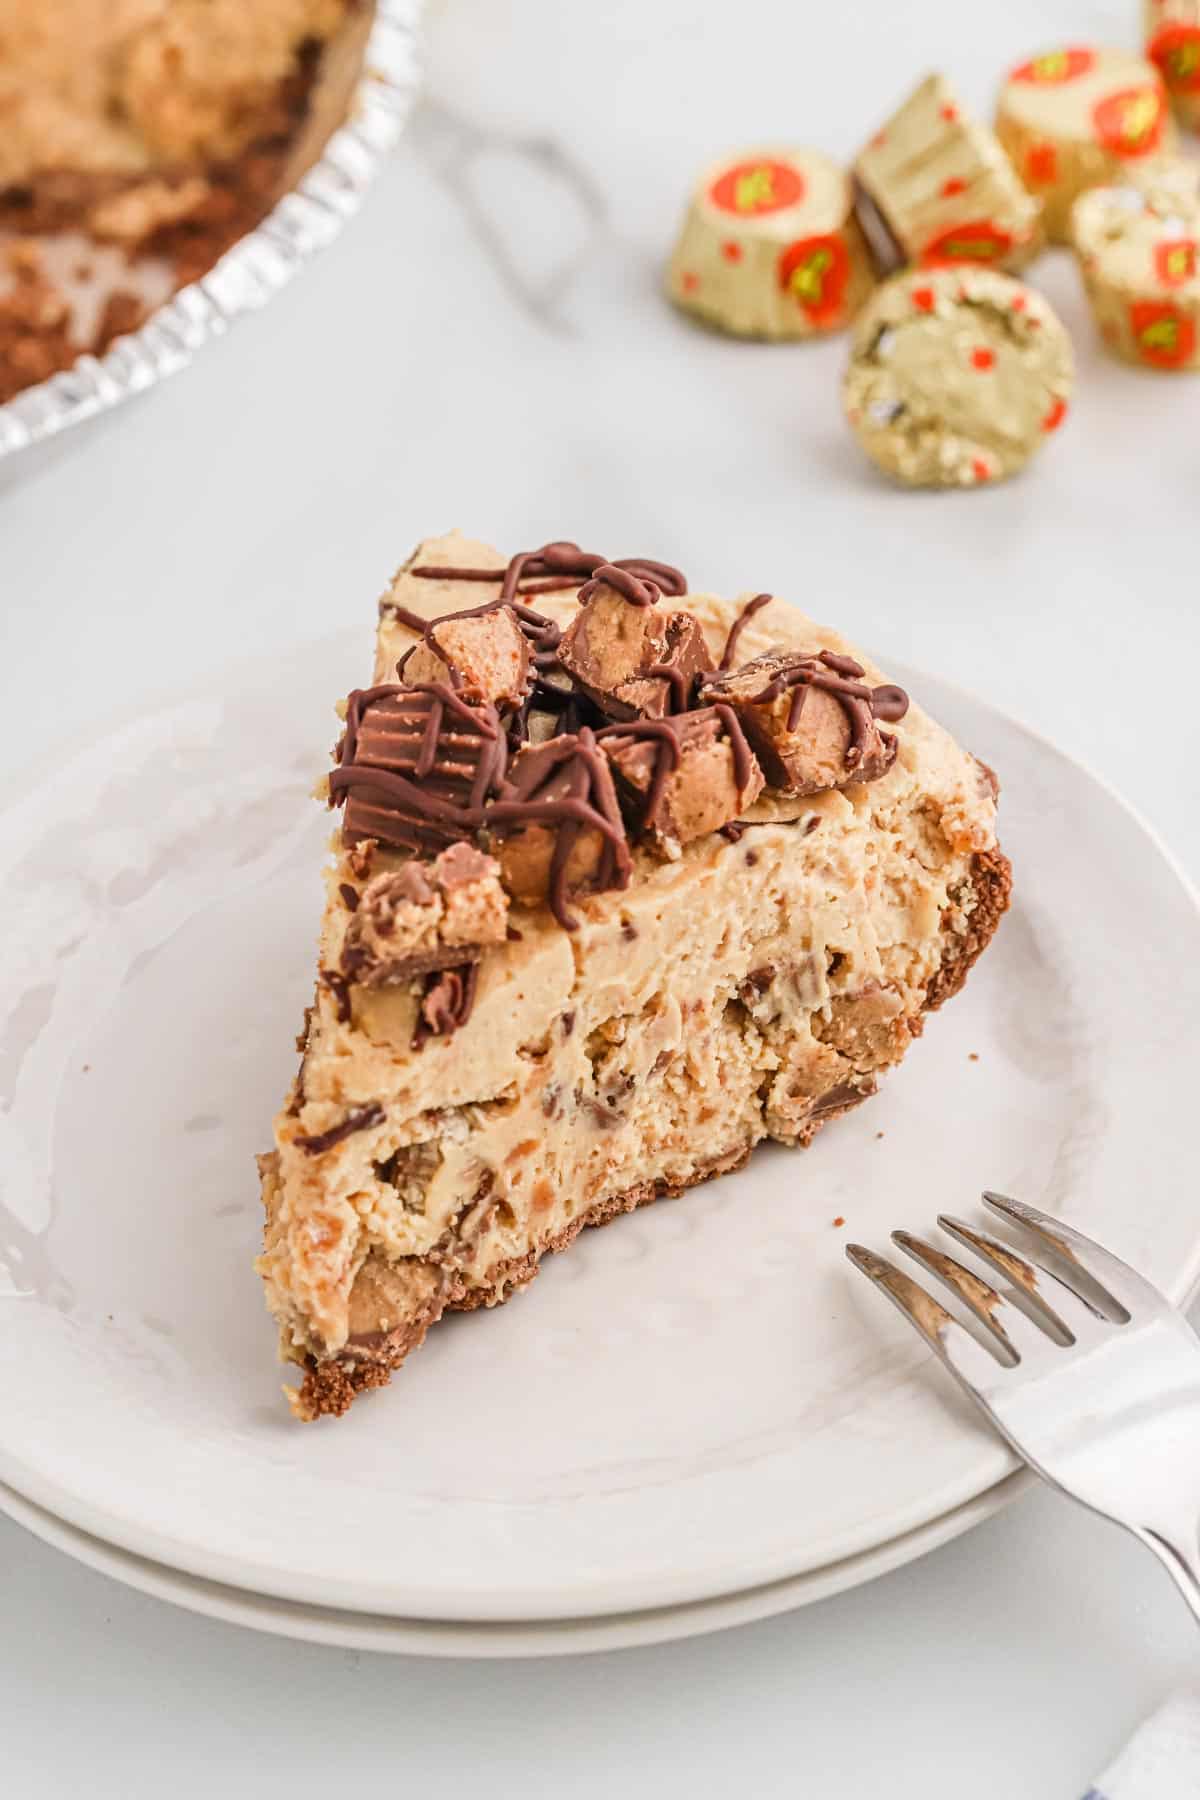 A slice of no bake peanut butter pie on a plate with a pie in the background.